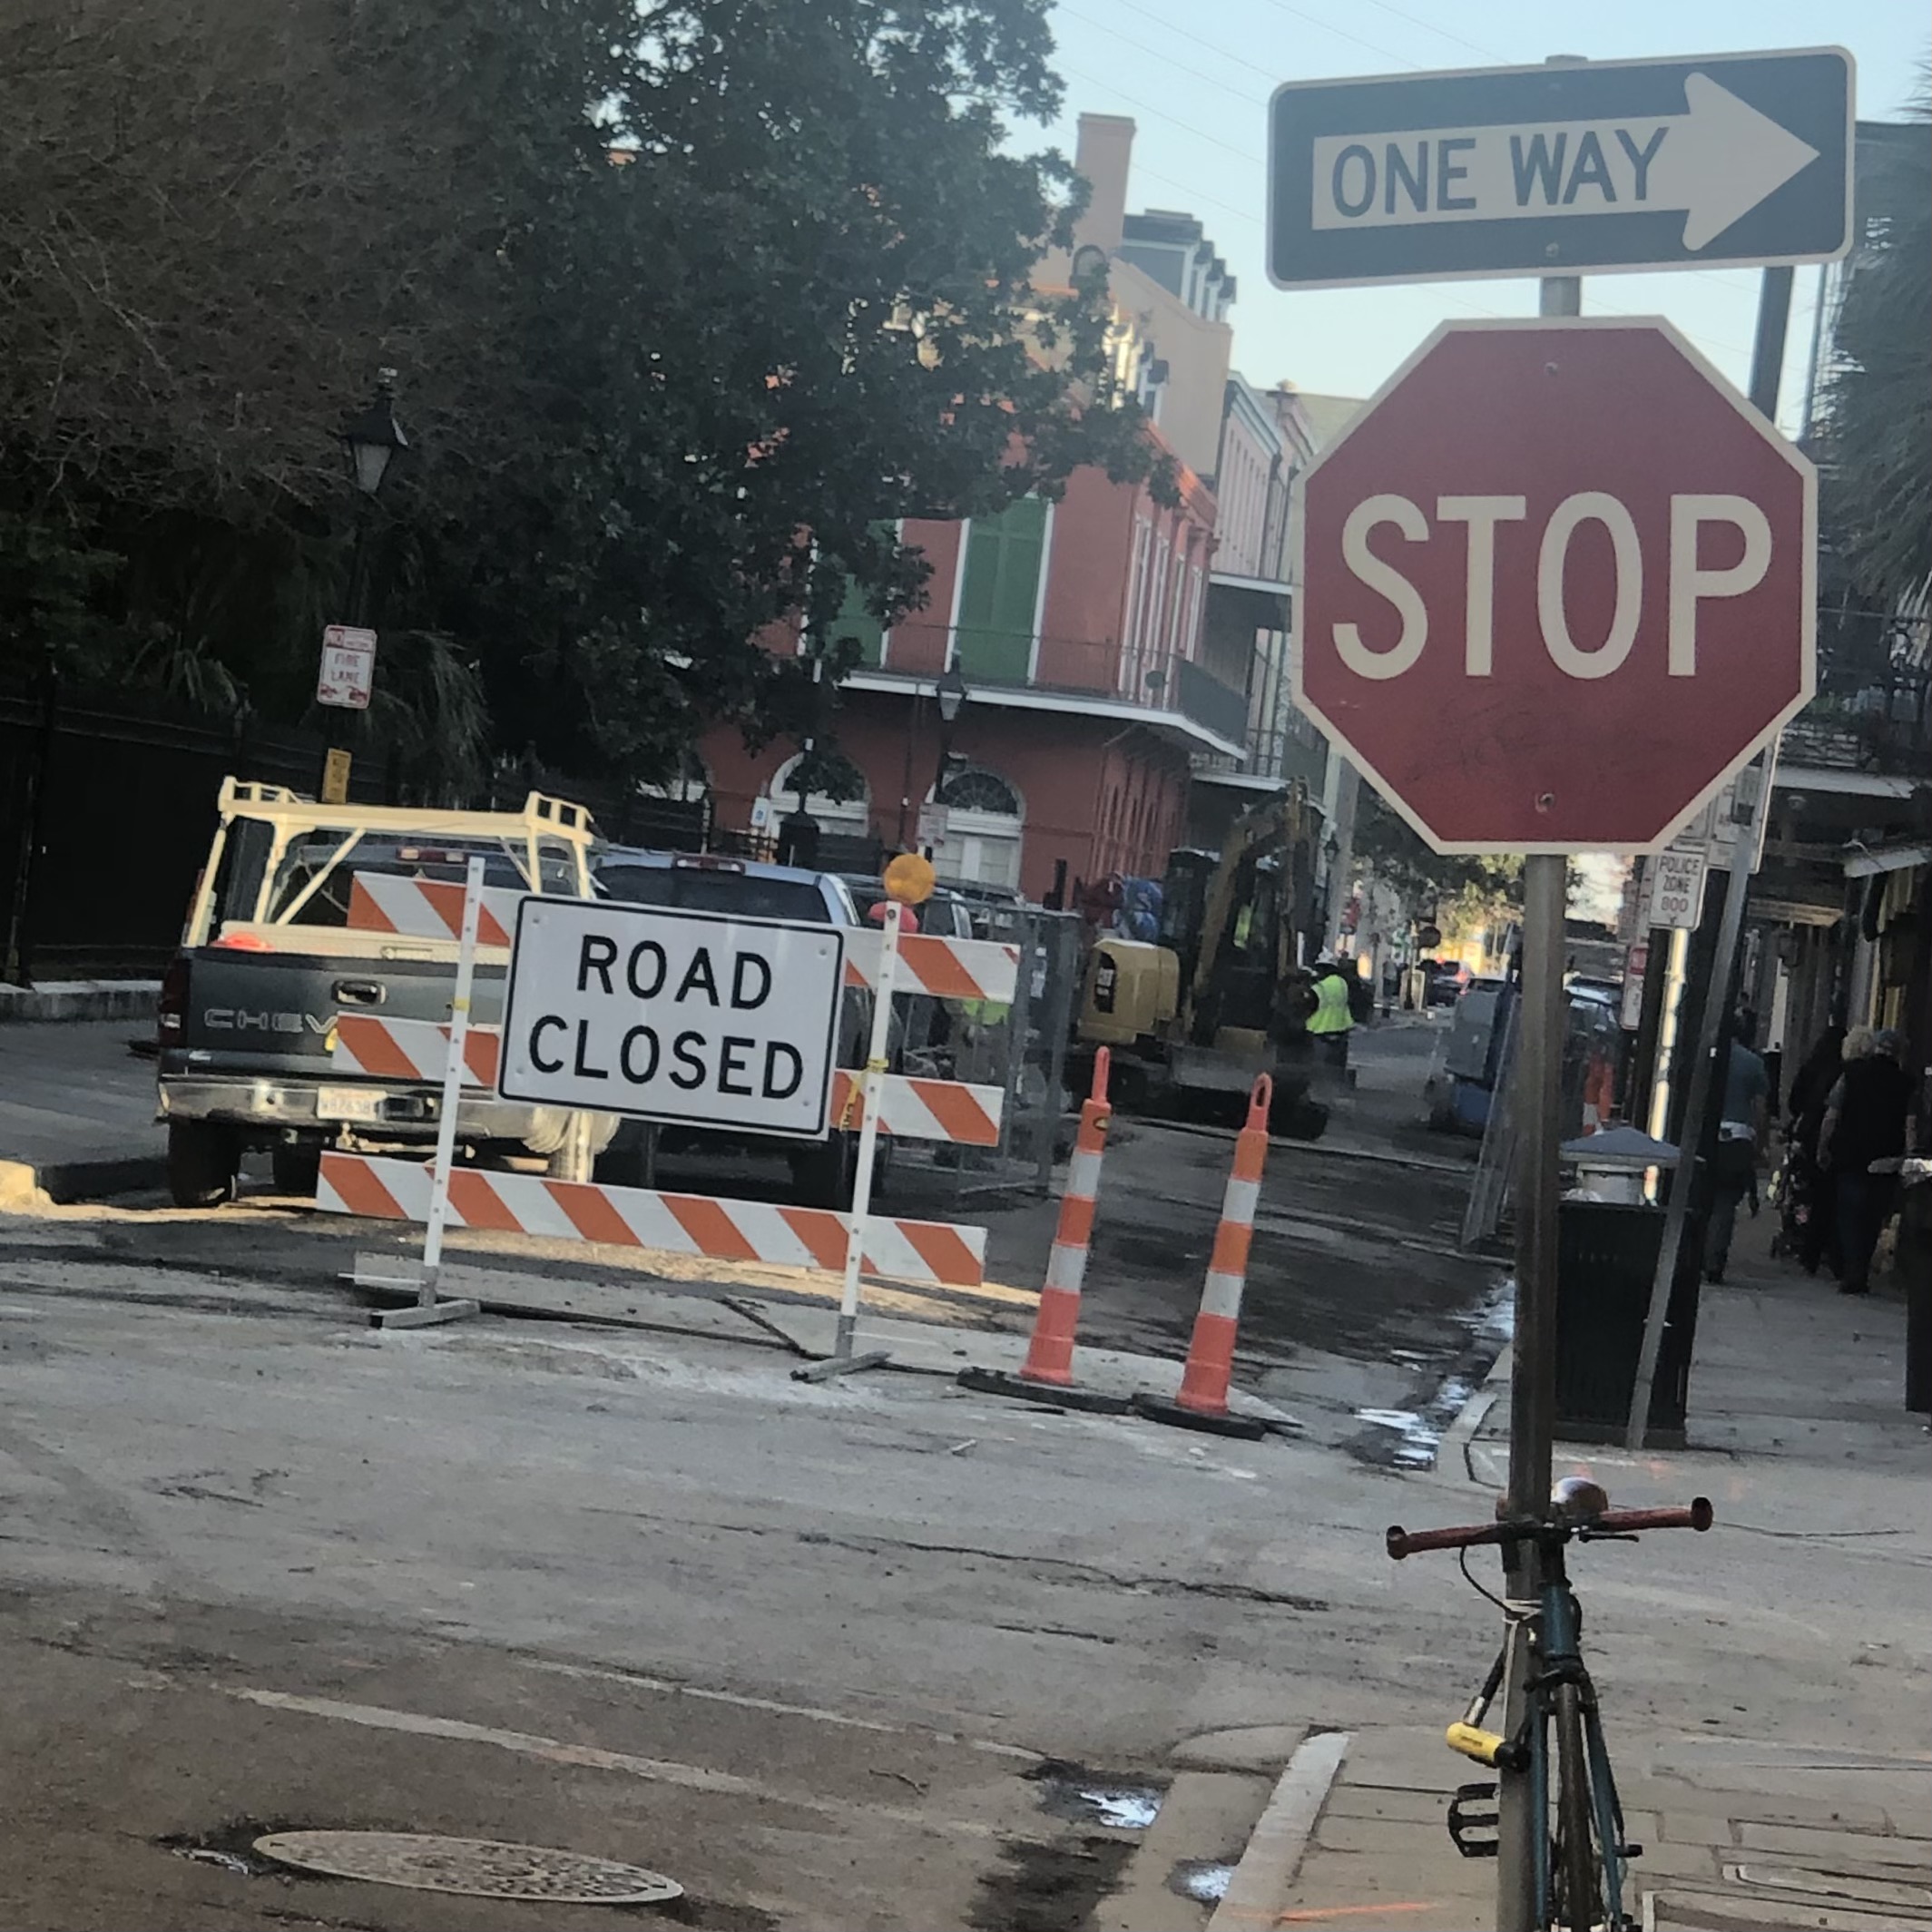 FULL RECONSTRUCTION PROJECT ON CONTI UNDERWAY BETWEEN BOURBON AND ROYAL STREETS